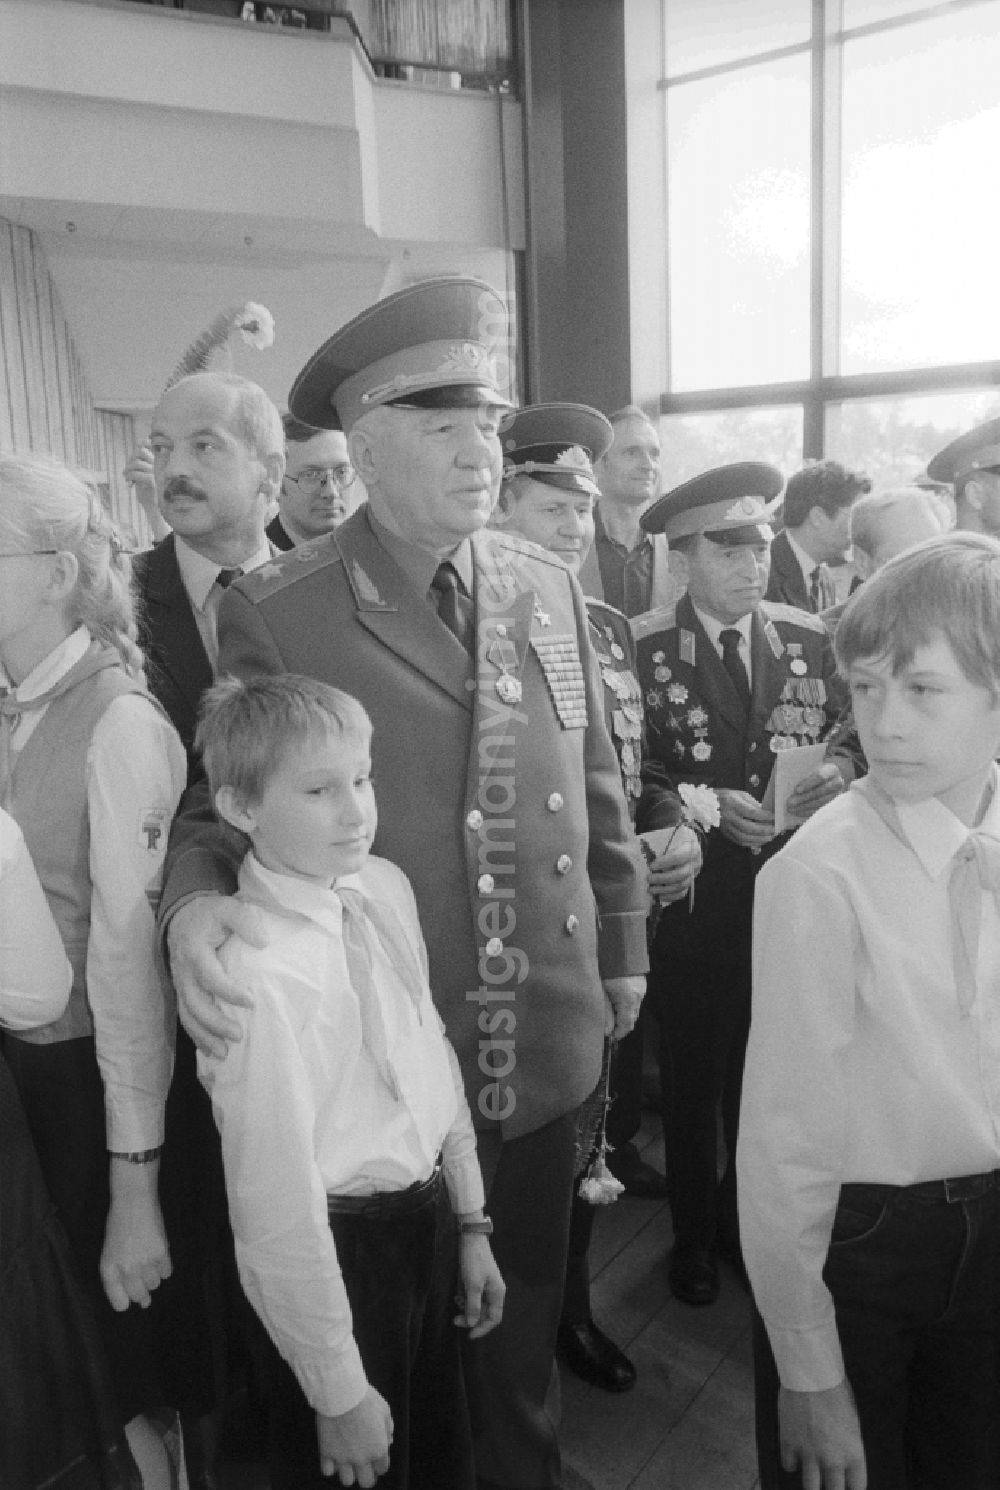 GDR image archive: Berlin - Pioneers while meeting with Soviet war veterans on the 4